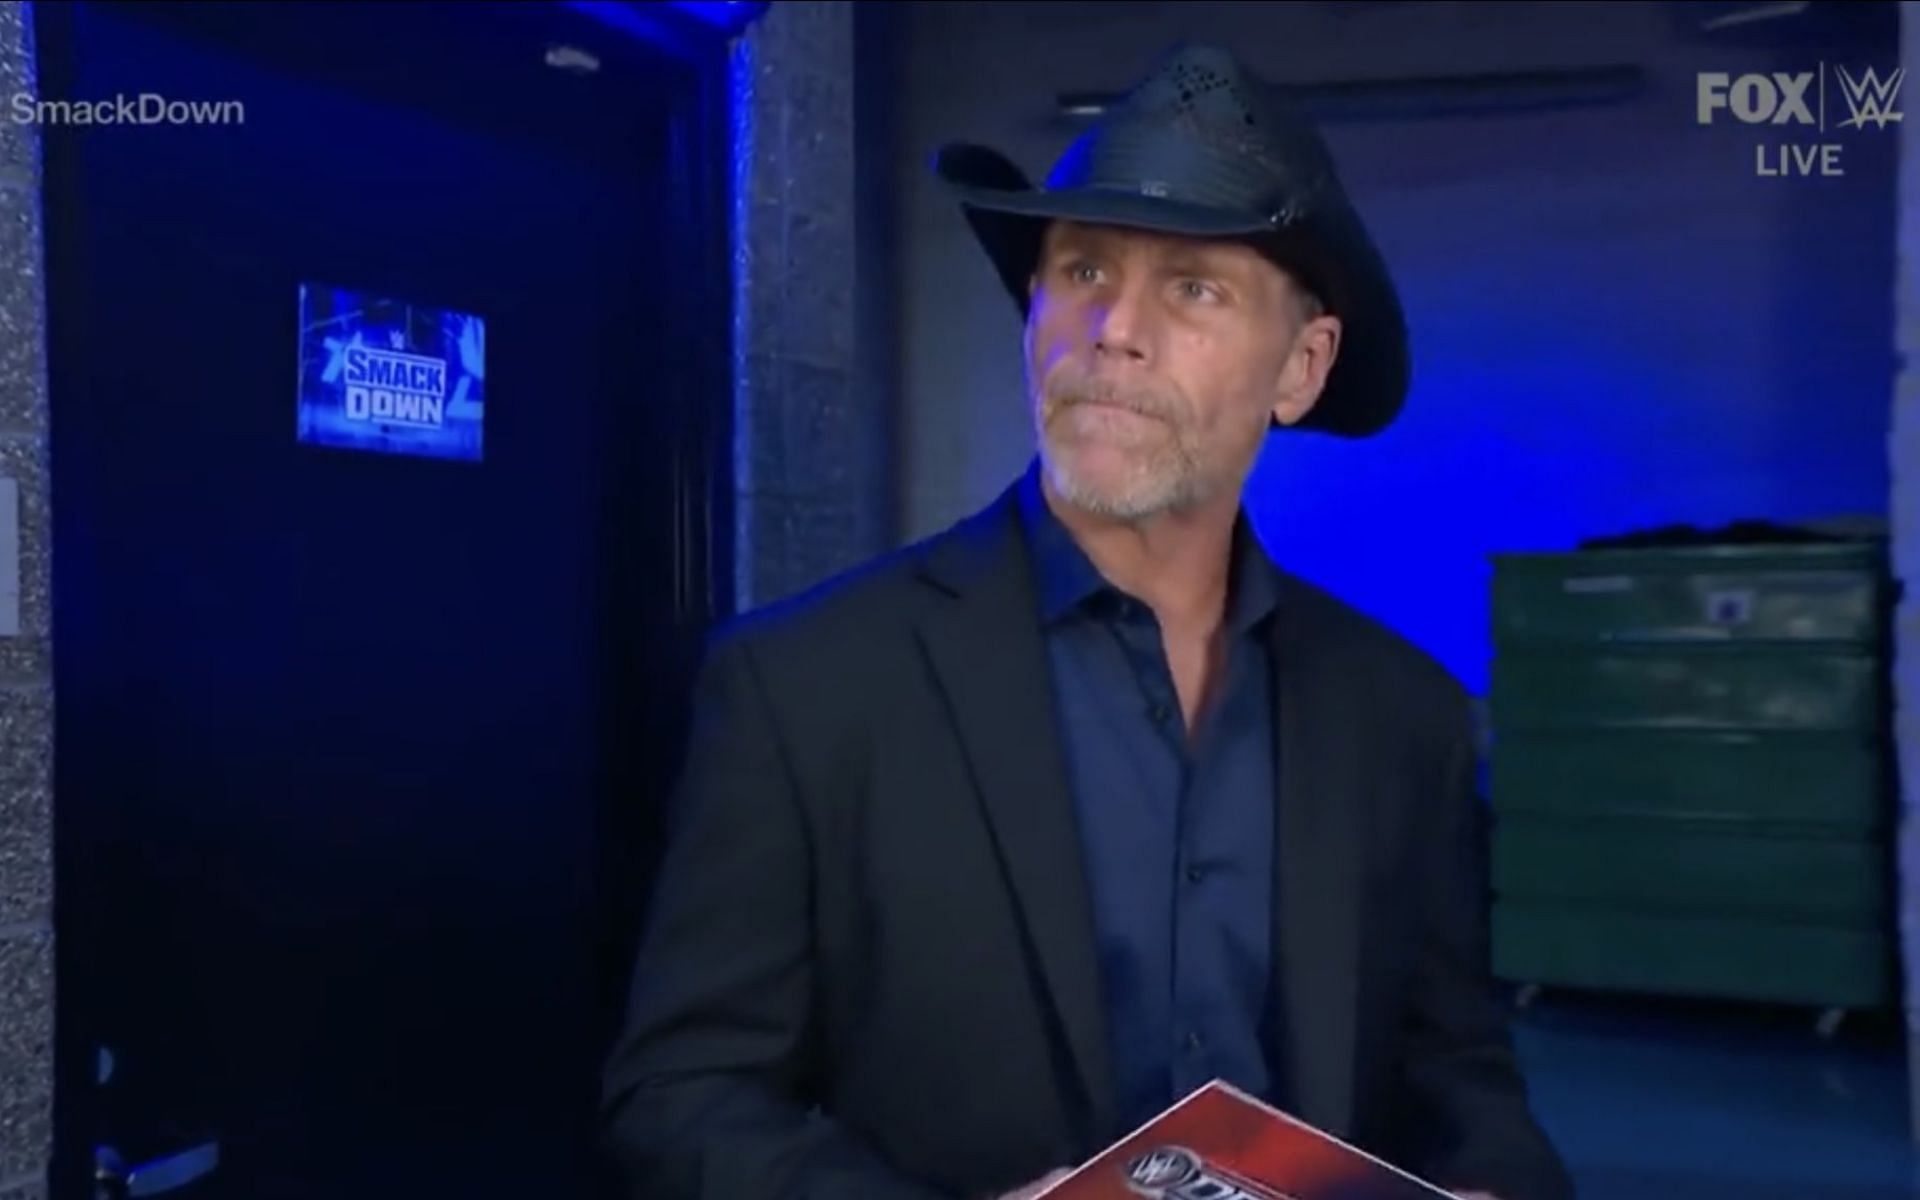 HBK announced the fourth-round picks for the WWE Draft